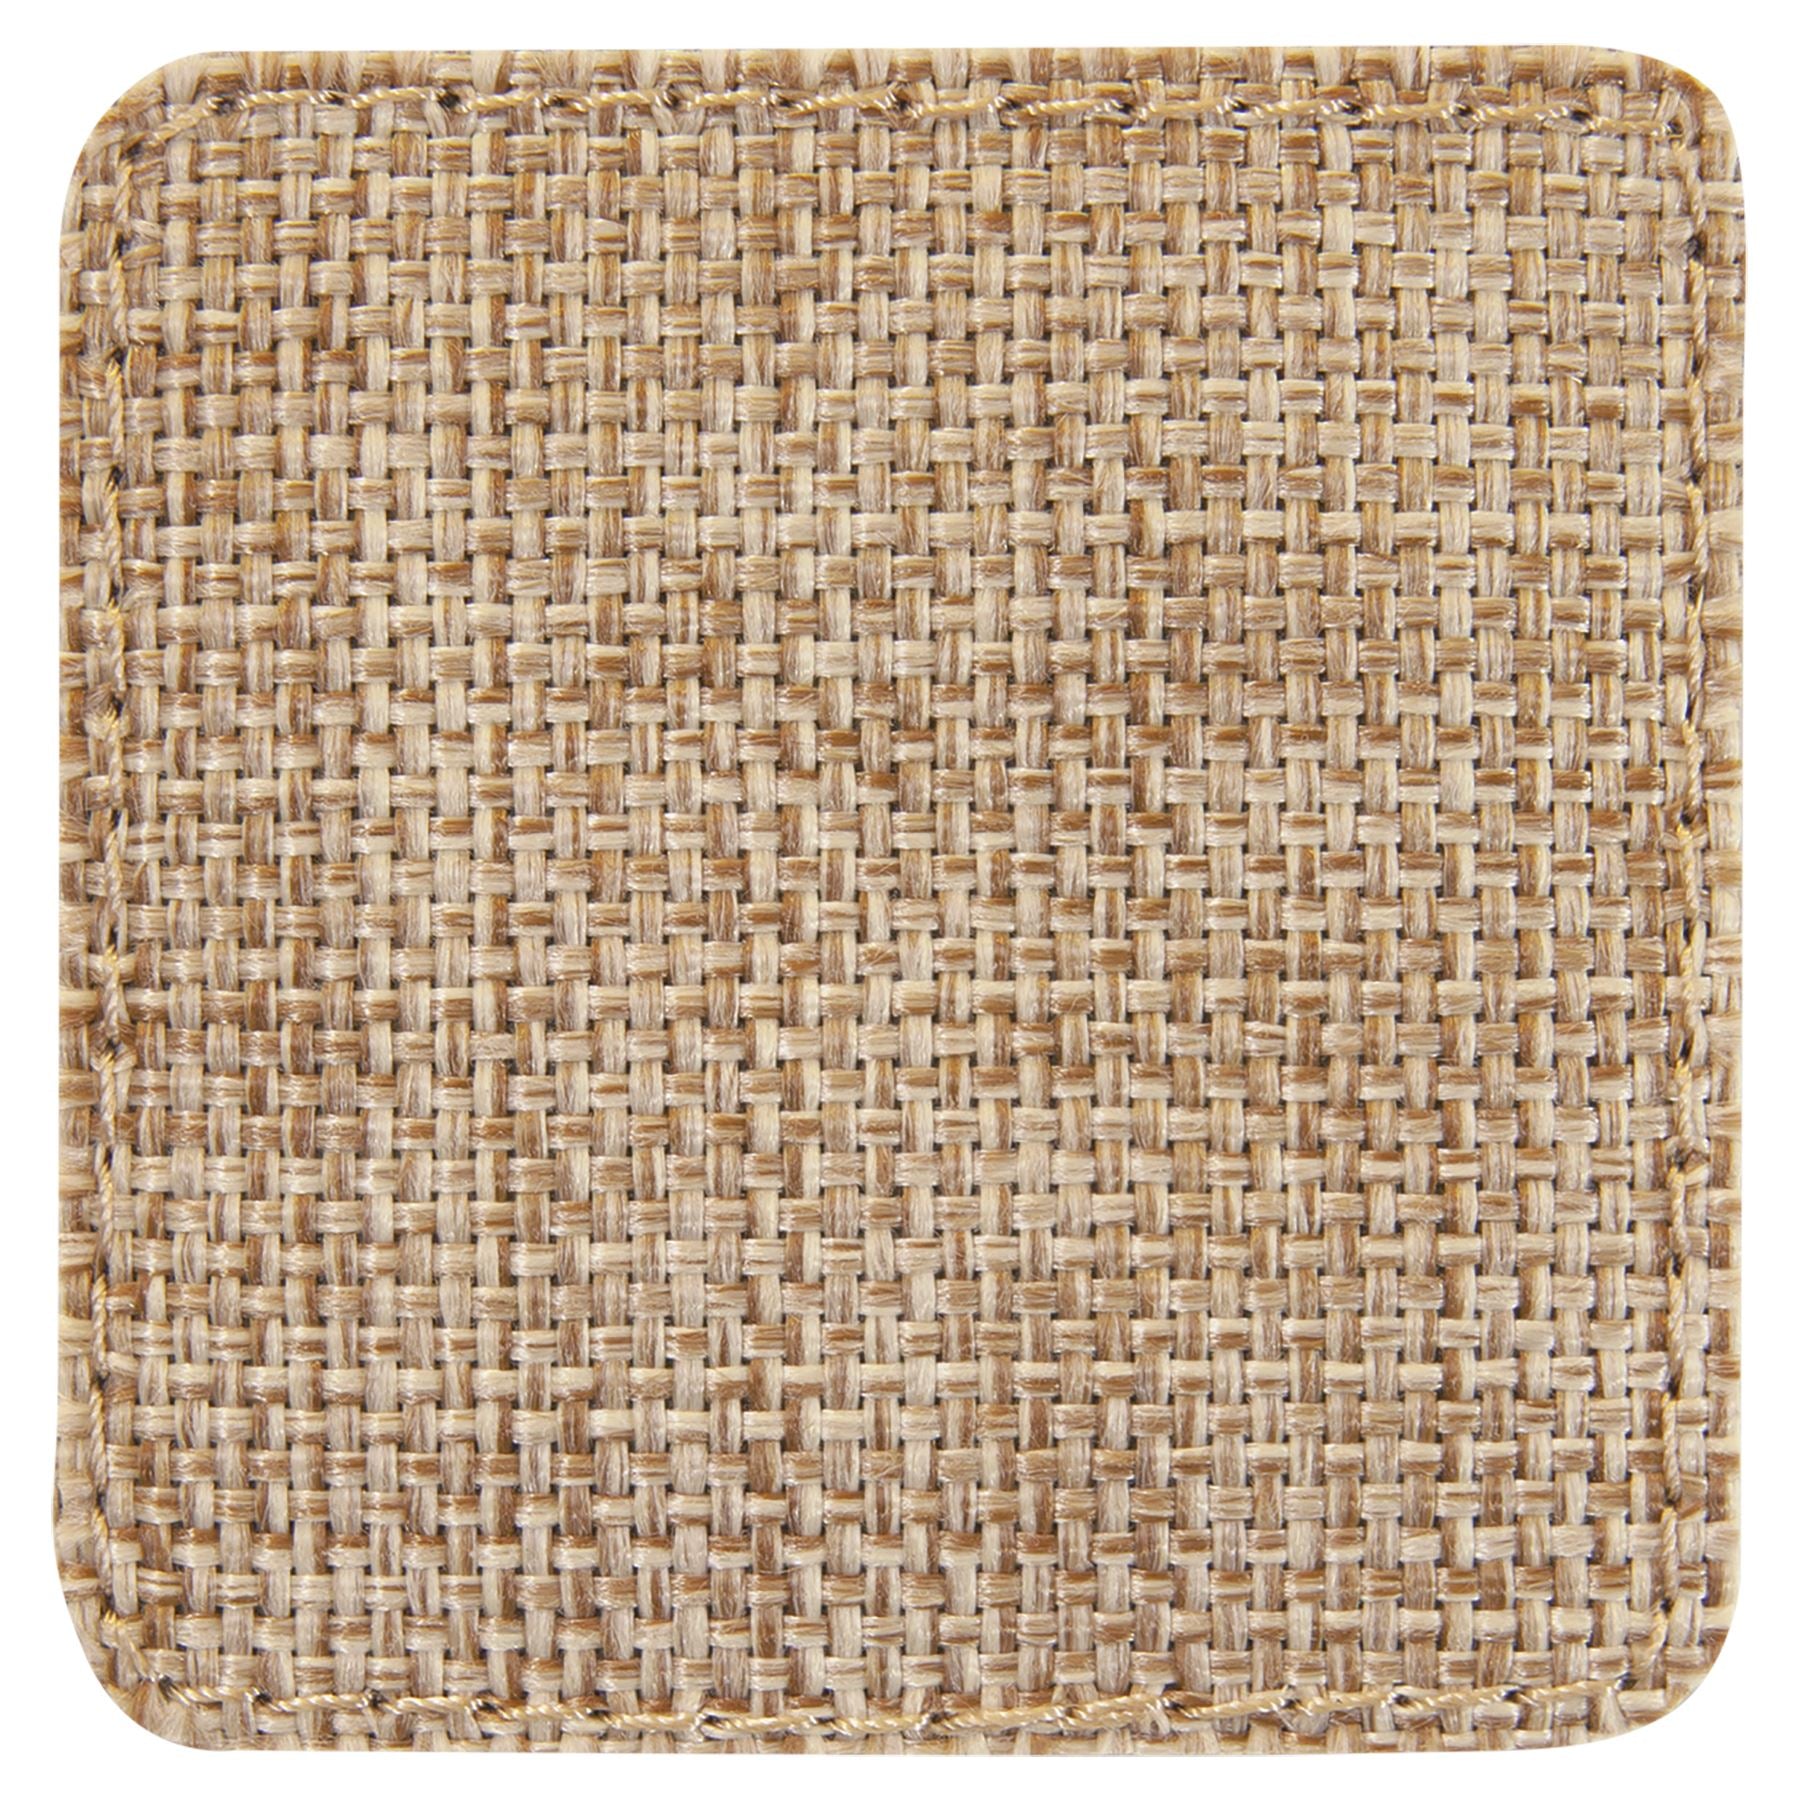 Square Patch with Adhesive, Sublimatable Burlap, 2 1/2" x 2 1/2" Burlap Patches Craftworks NW 